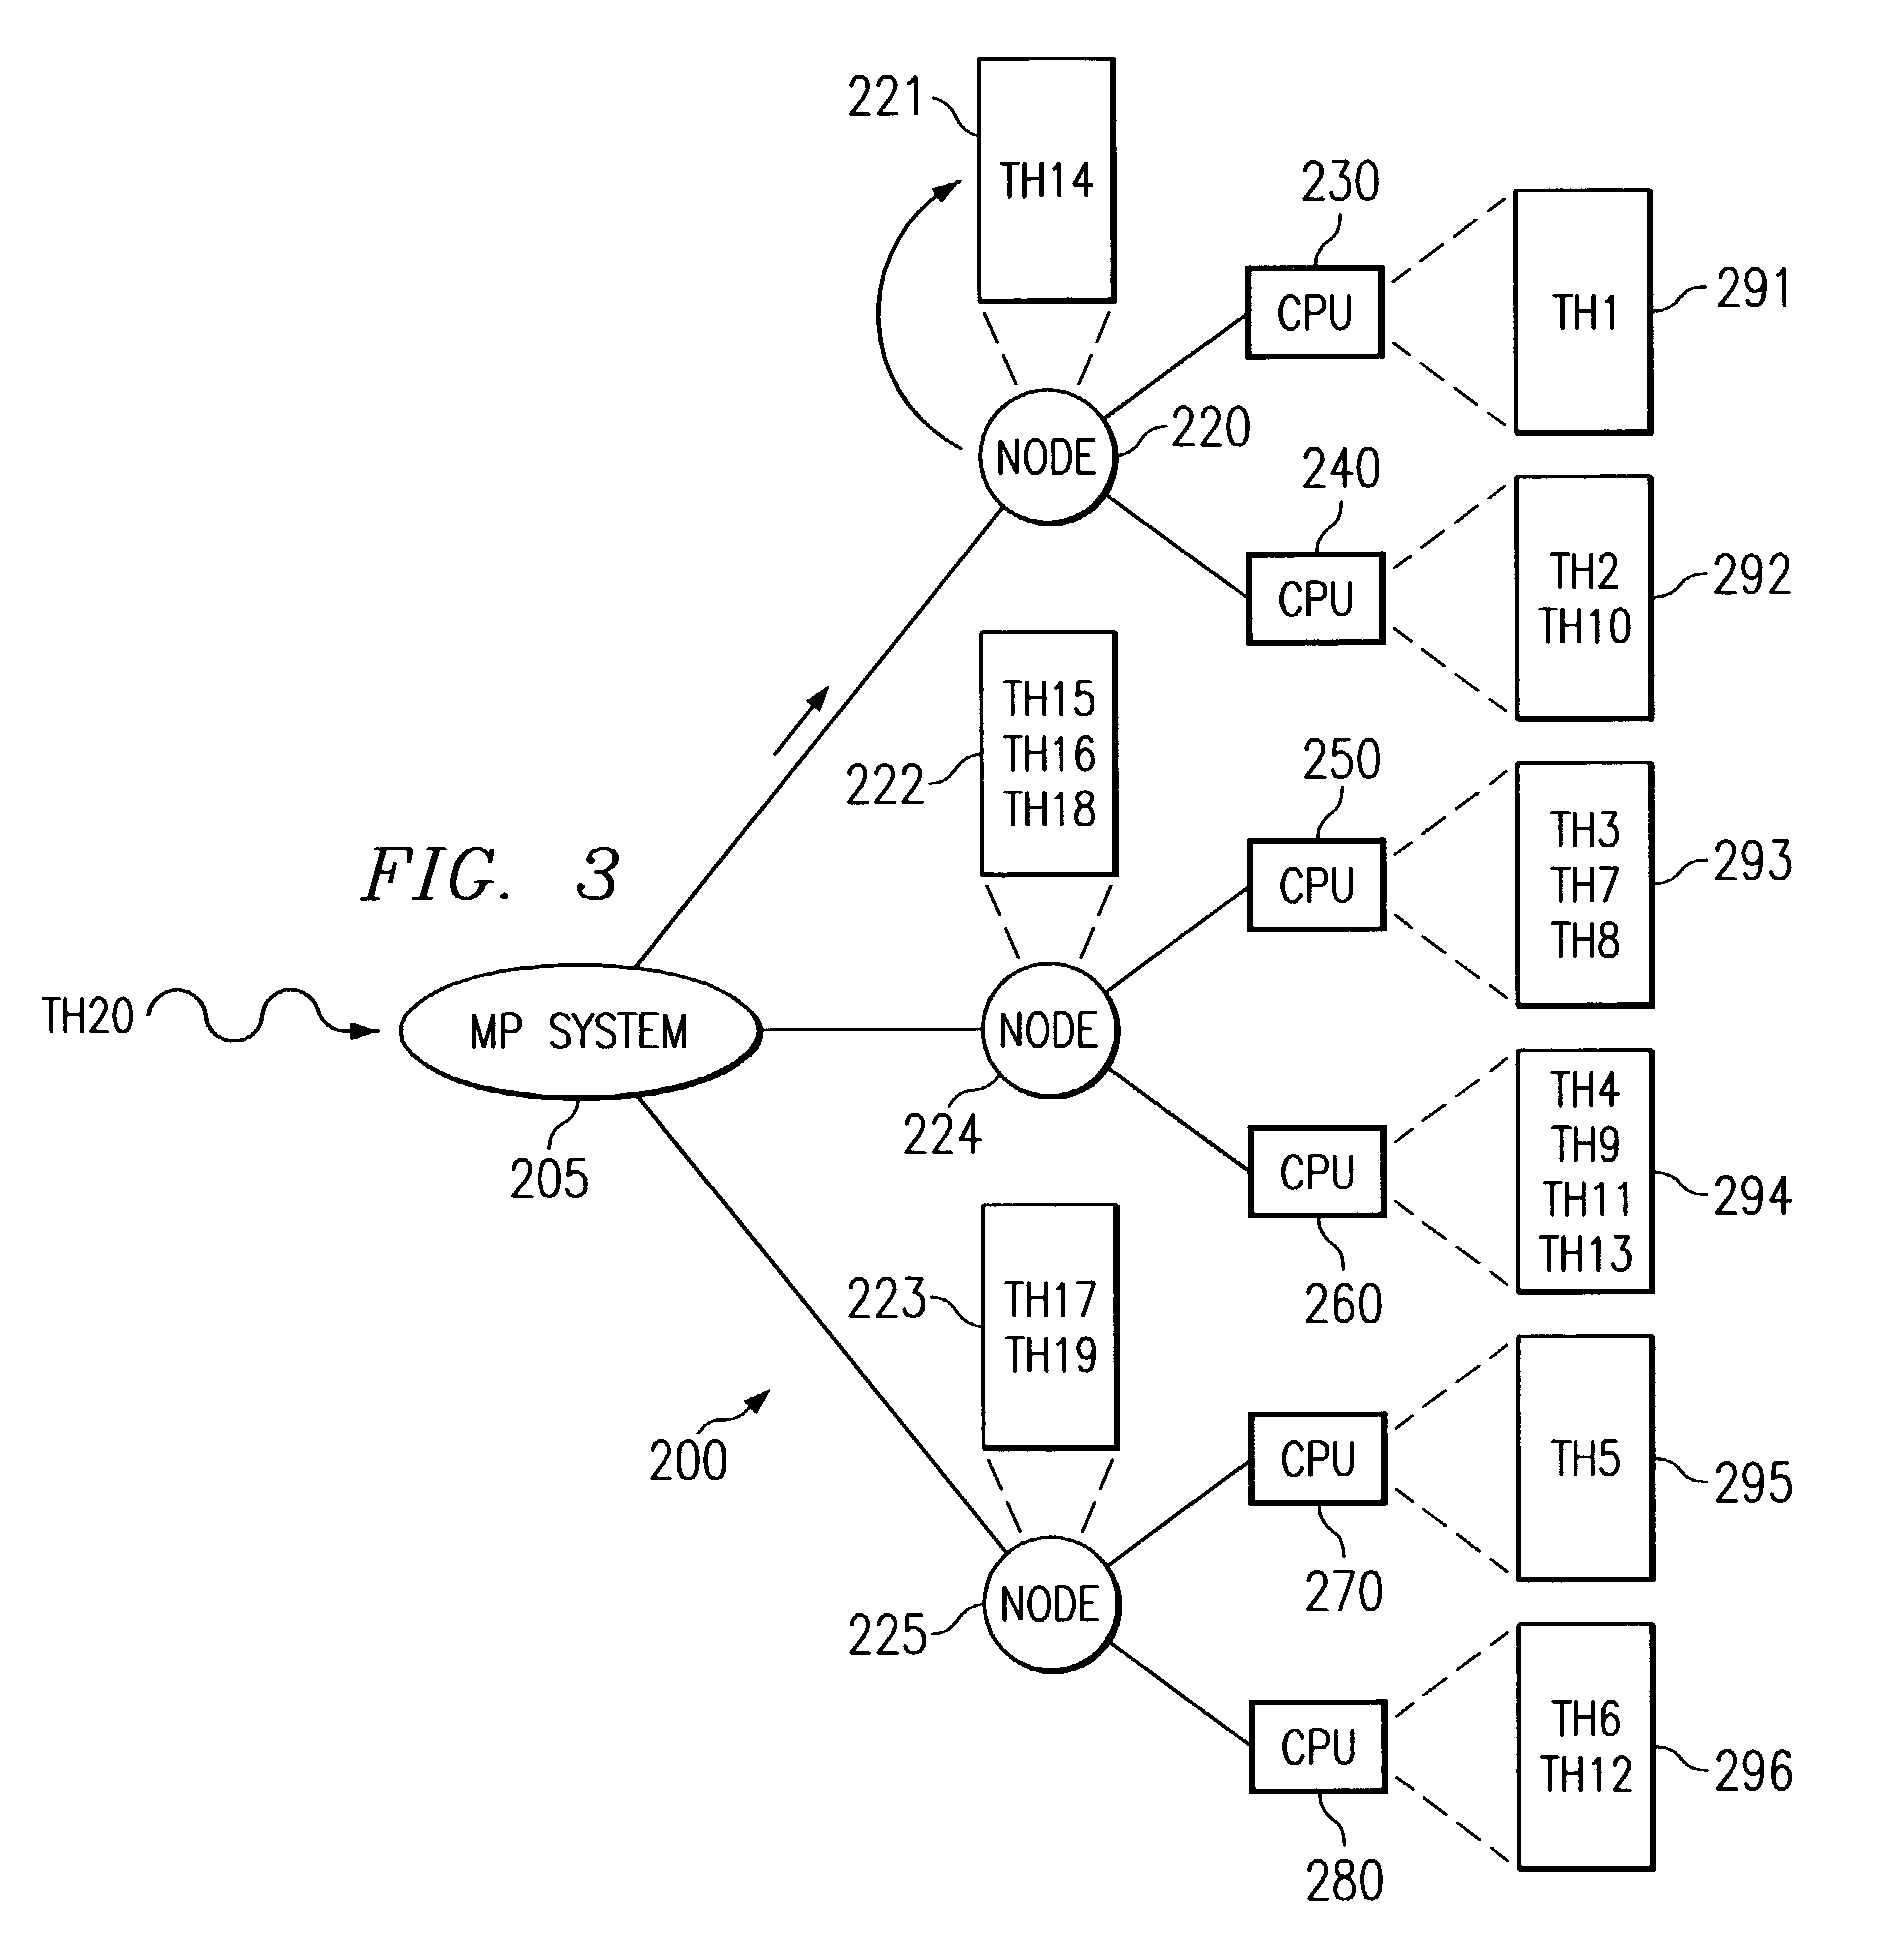 Apparatus and method for load balancing of fixed priority threads in a multiple run queue environment